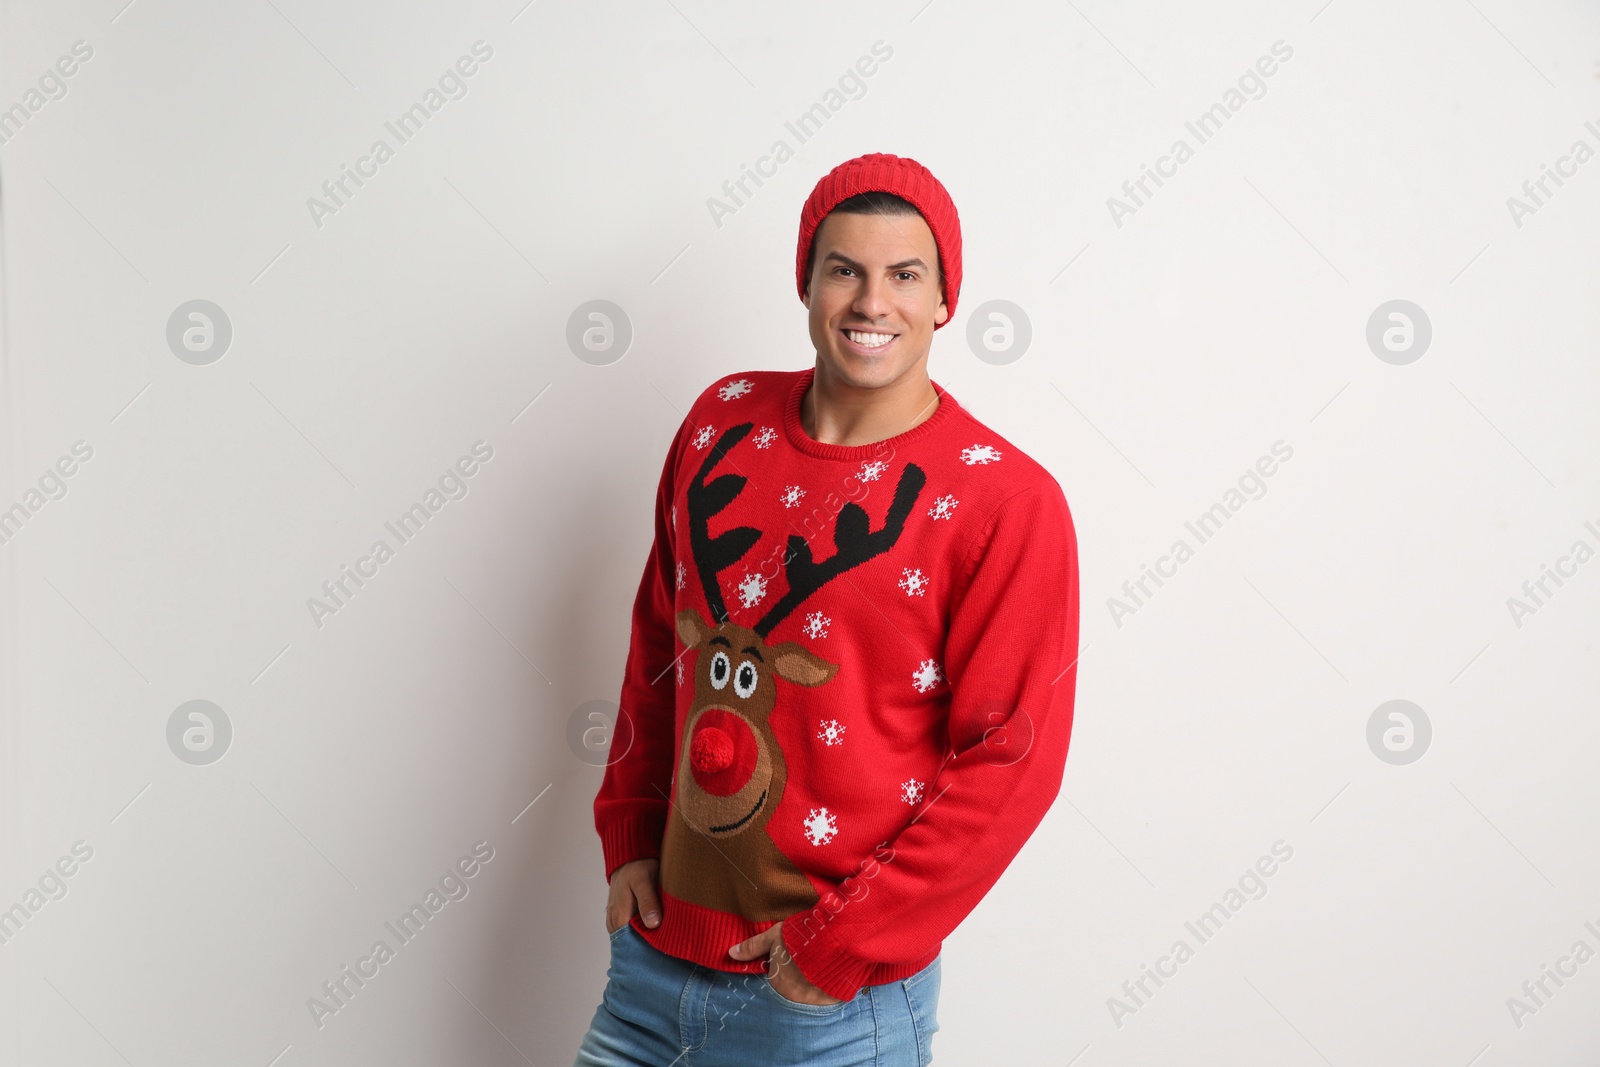 Photo of Handsome man in Christmas sweater and hat on white background